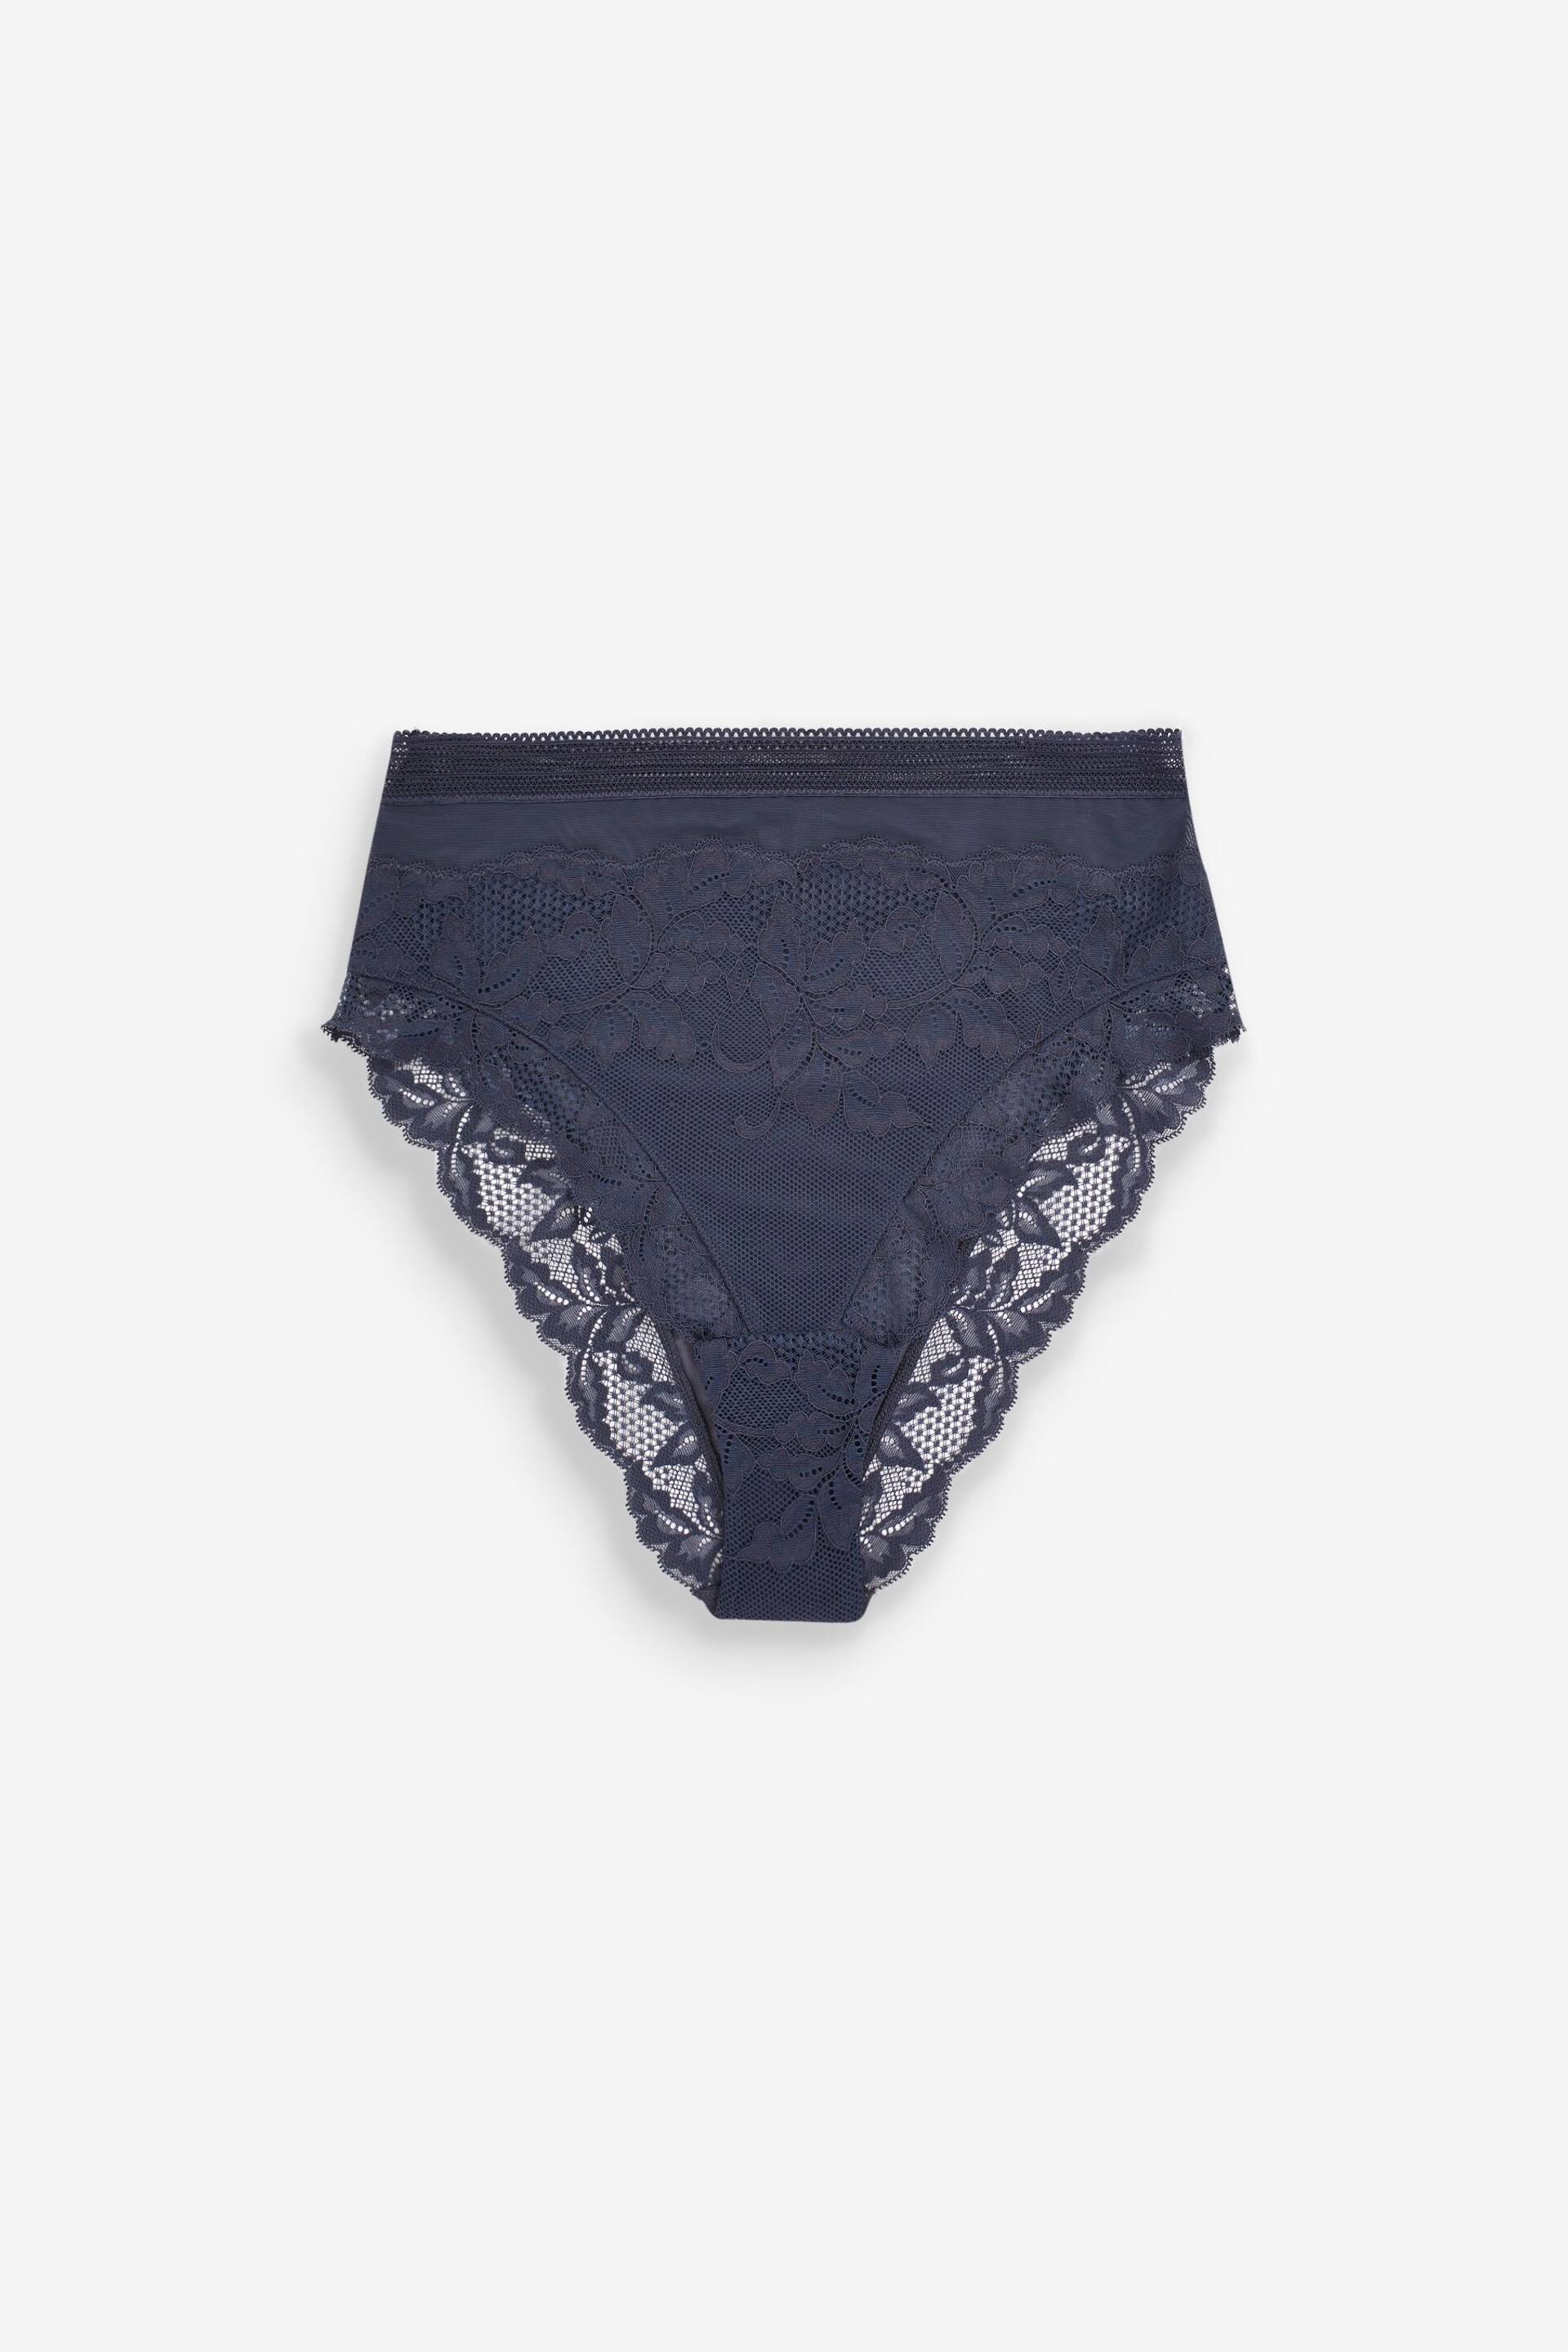 Neutral/Navy Blue High Rise High Leg Lace Knickers 2 Pack - Image 11 of 13